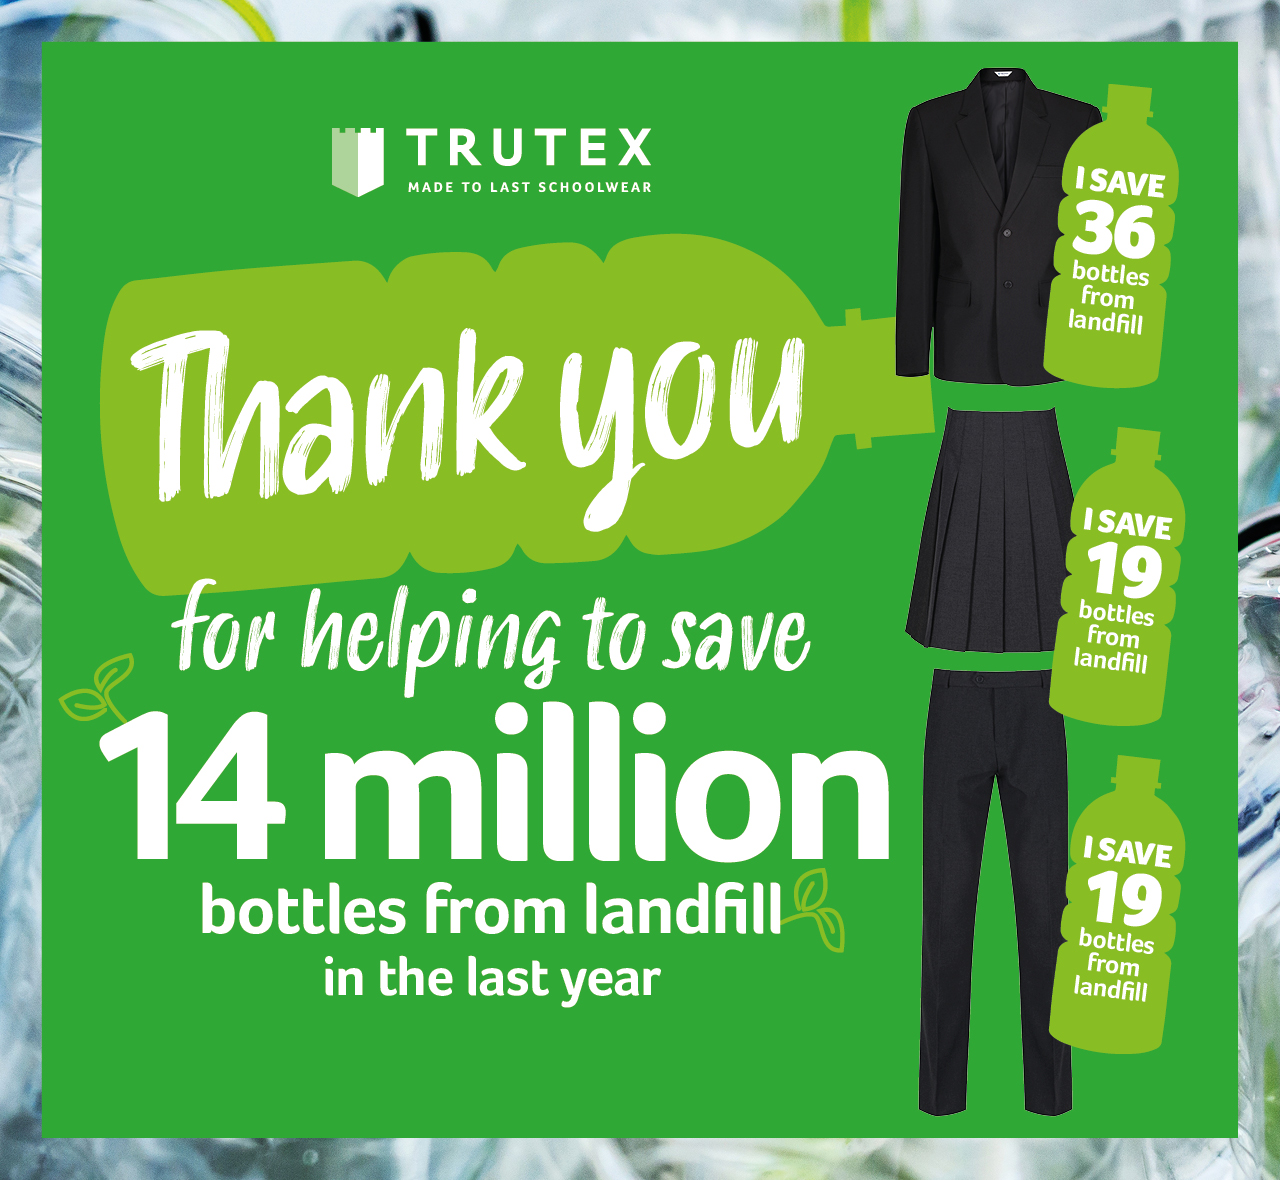 Thank you for helping to save 14 million plastic bottles from landfill